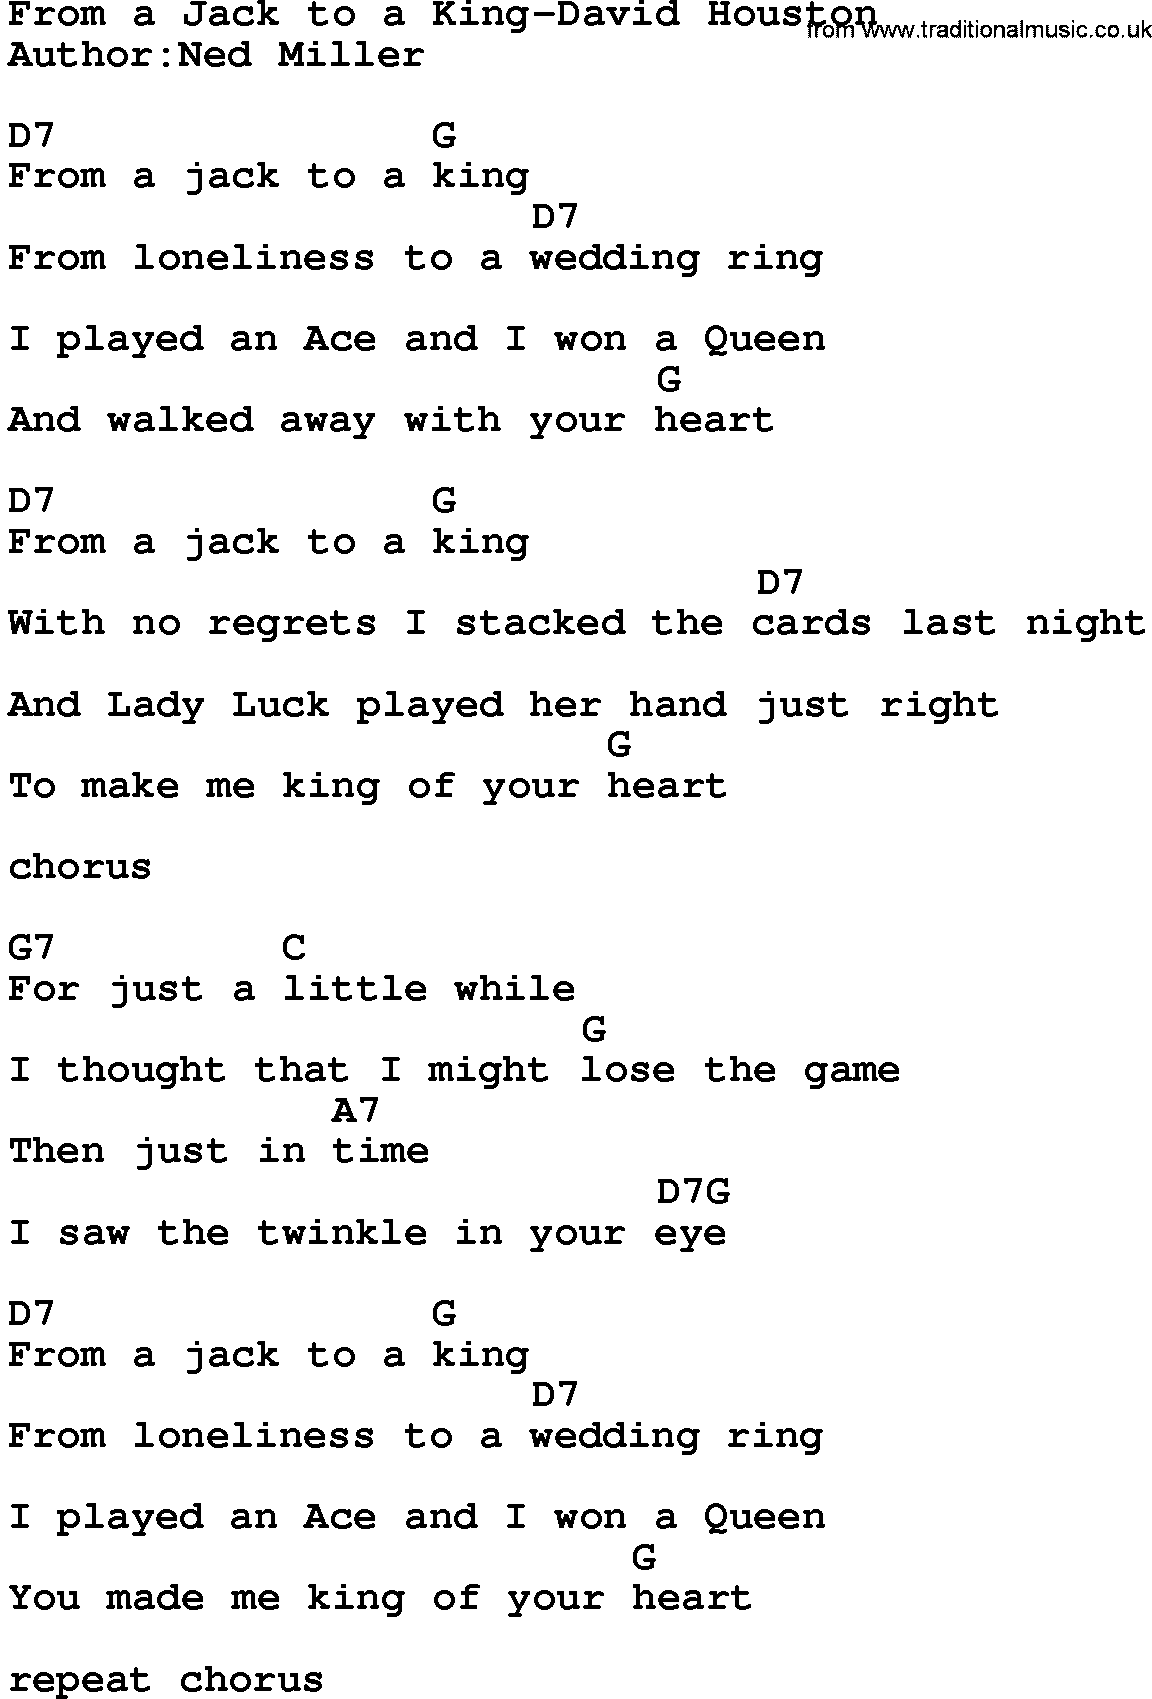 Country music song: From A Jack To A King-David Houston lyrics and chords